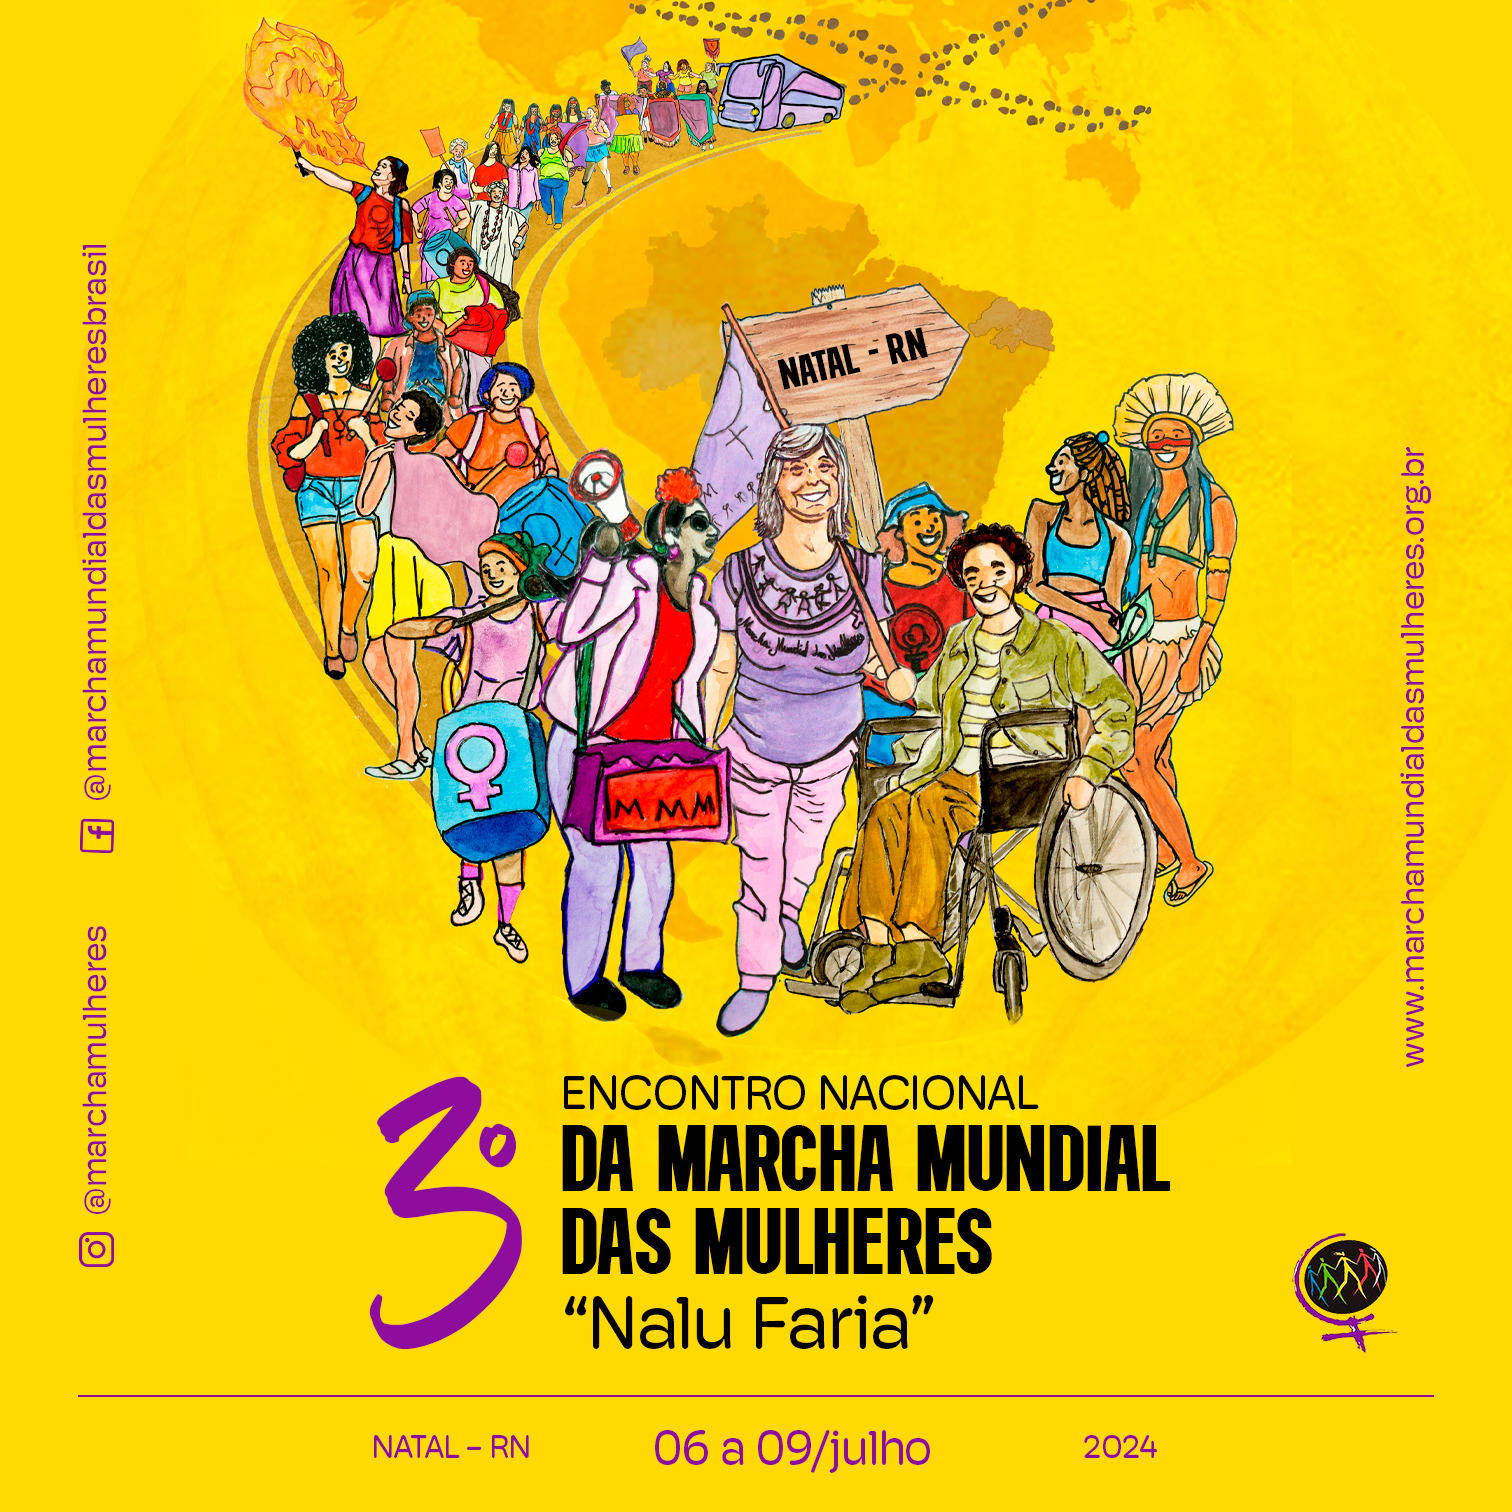 World March of Women Brasil Prepares for its 3rd "Nalu Faria" National Meeting in July